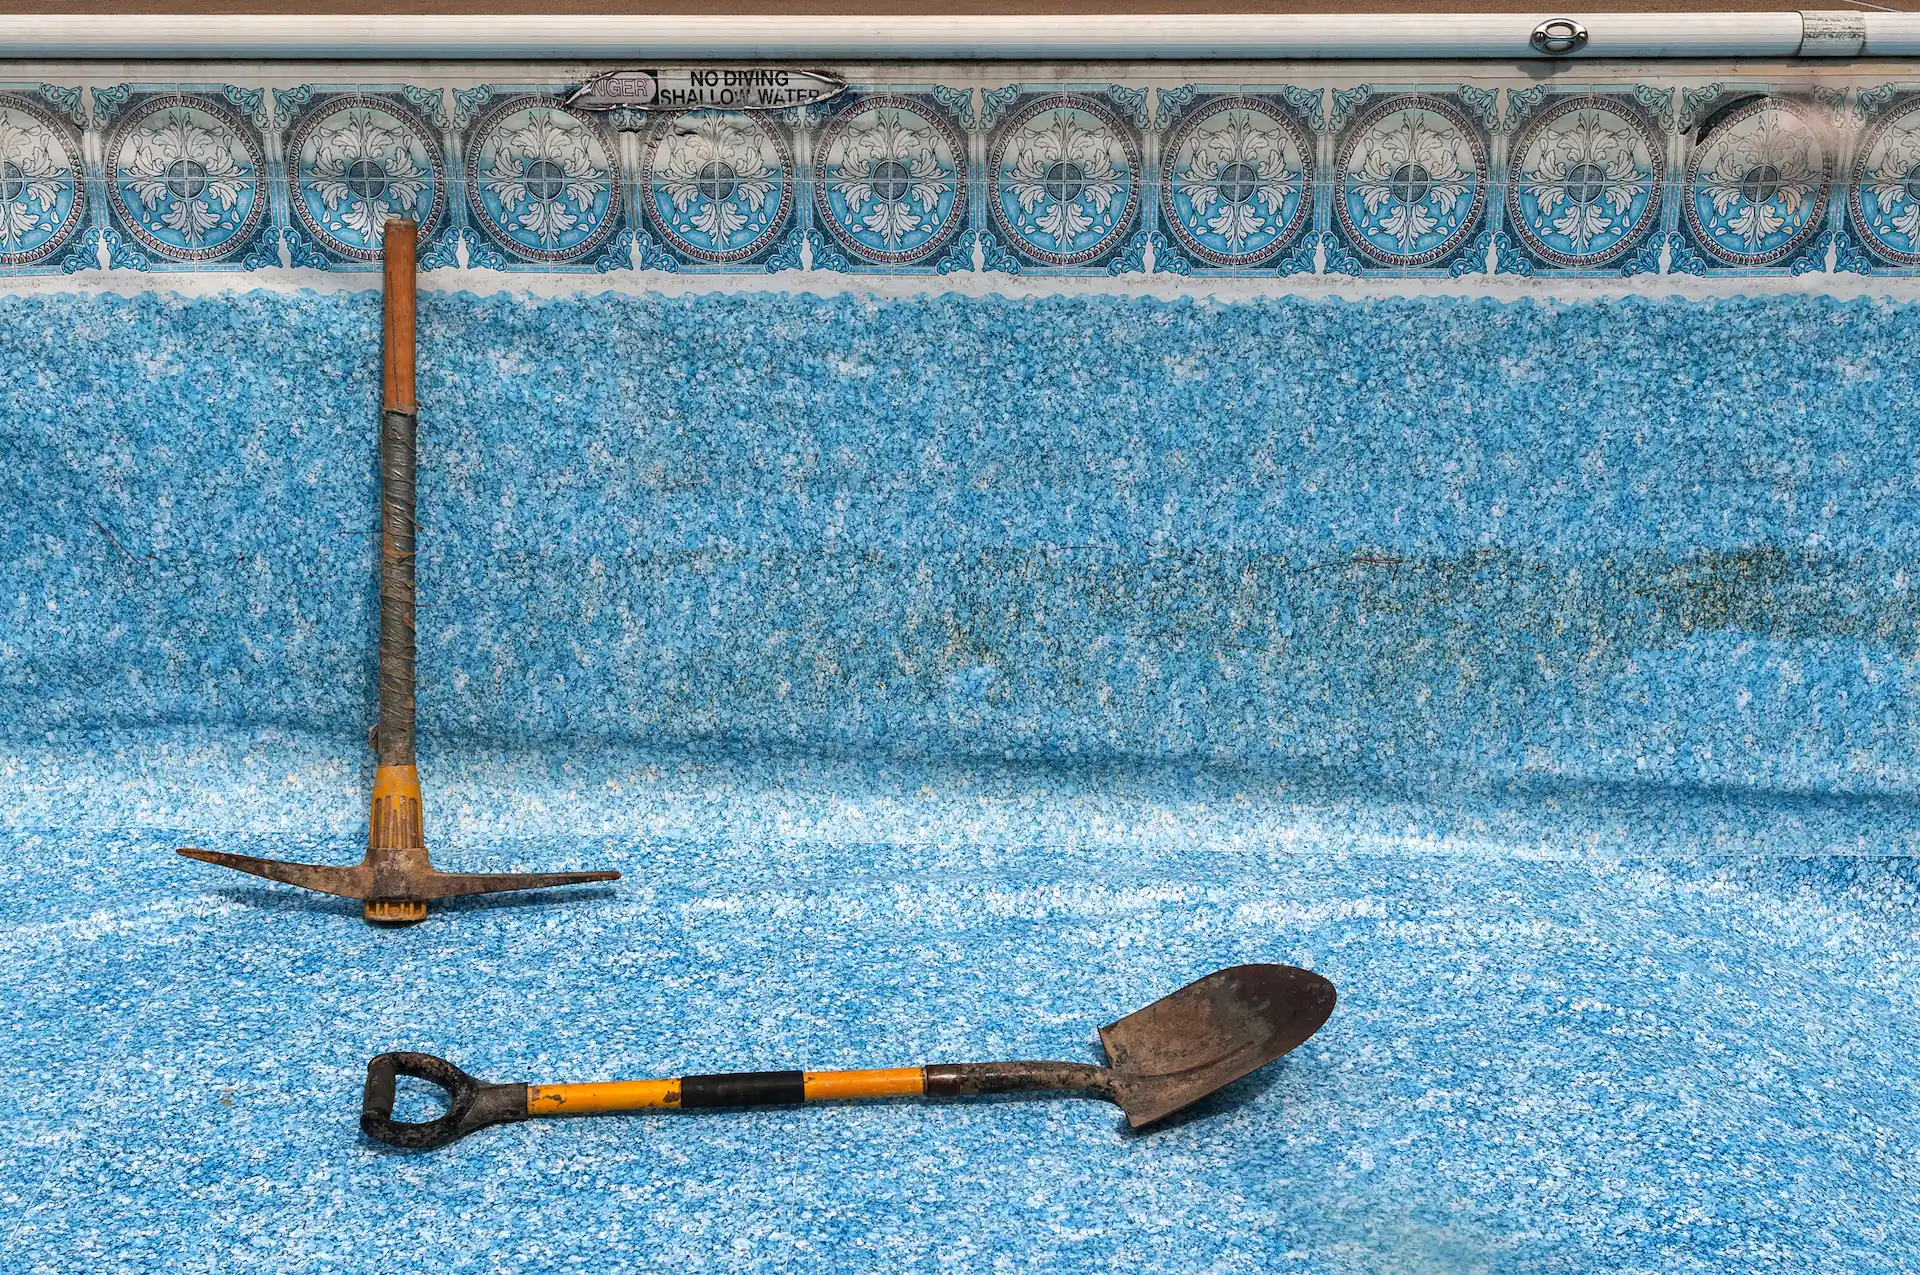 Medium shot of a pick axe and shovel sitting in an empty inground pool with a faded, discolored vinyl pool liner. Discoloration and stains are signs that it's time to replace your vinyl liner.